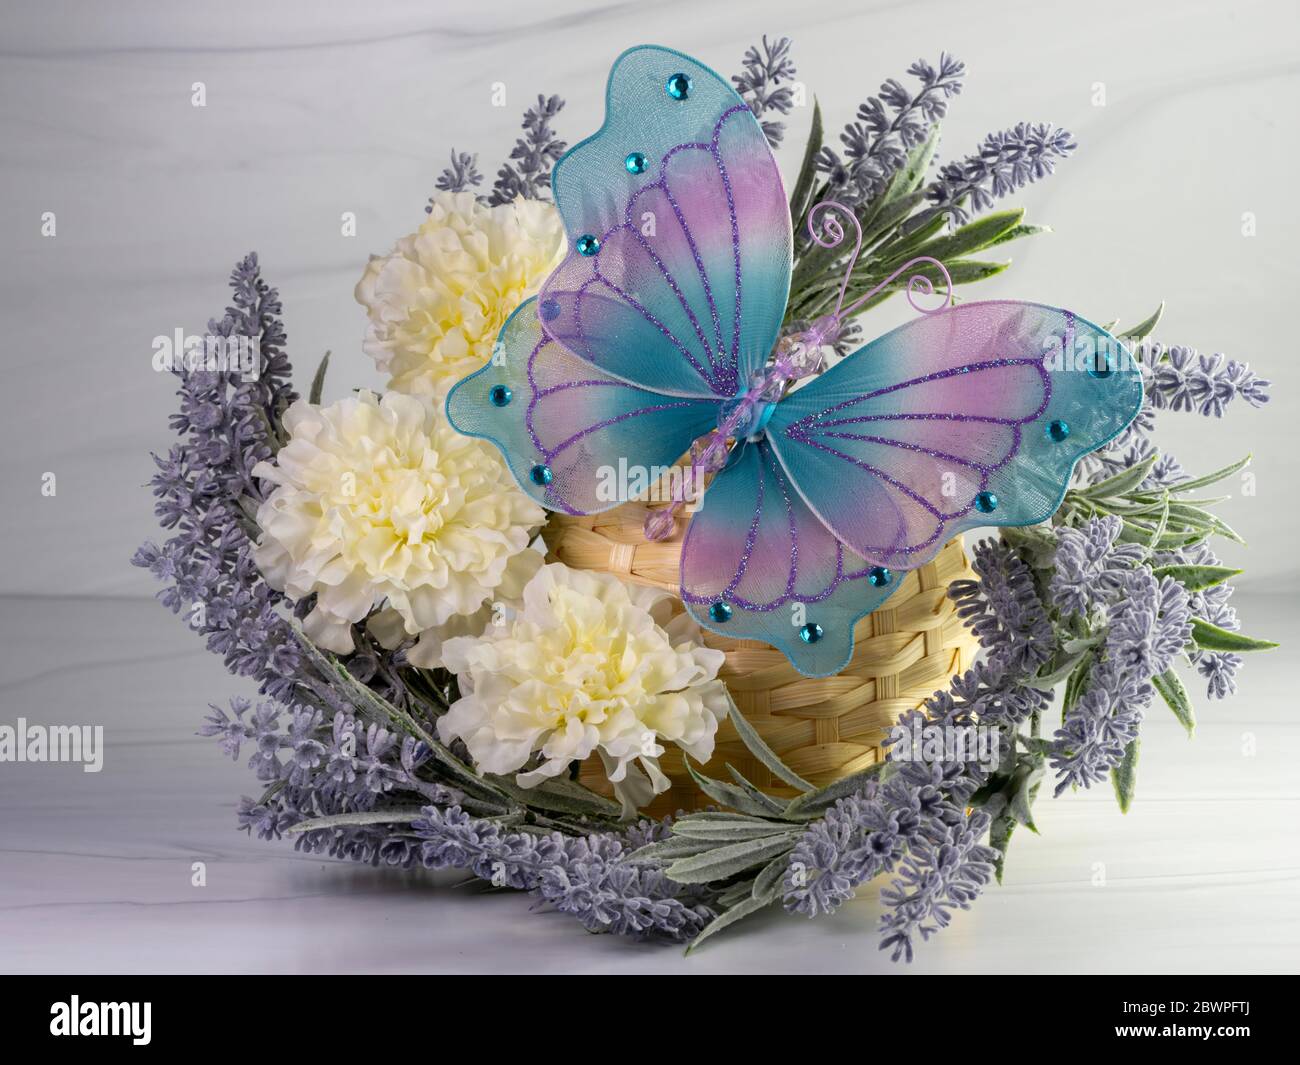 Lavender wreath with white carnations and a mesh blue and purple butterfly decorated with blue gem stones.  Purple flowers and white flowers on a neut Stock Photo